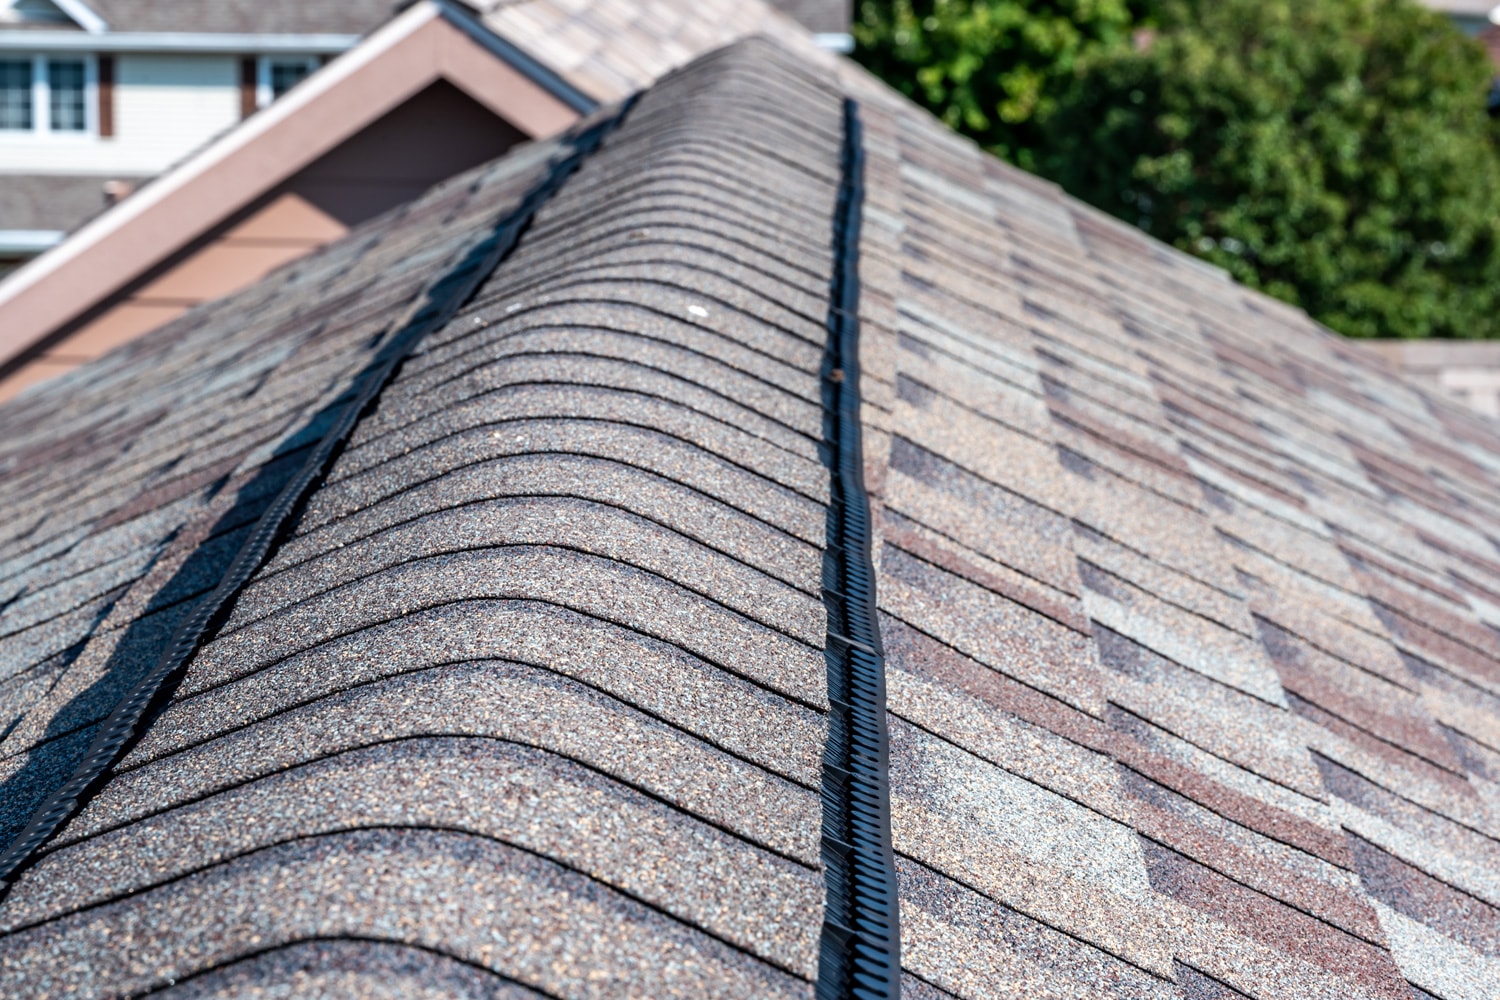 Ridge cap vent installed on a shingle roof for passive attic ventilation on a residential house.